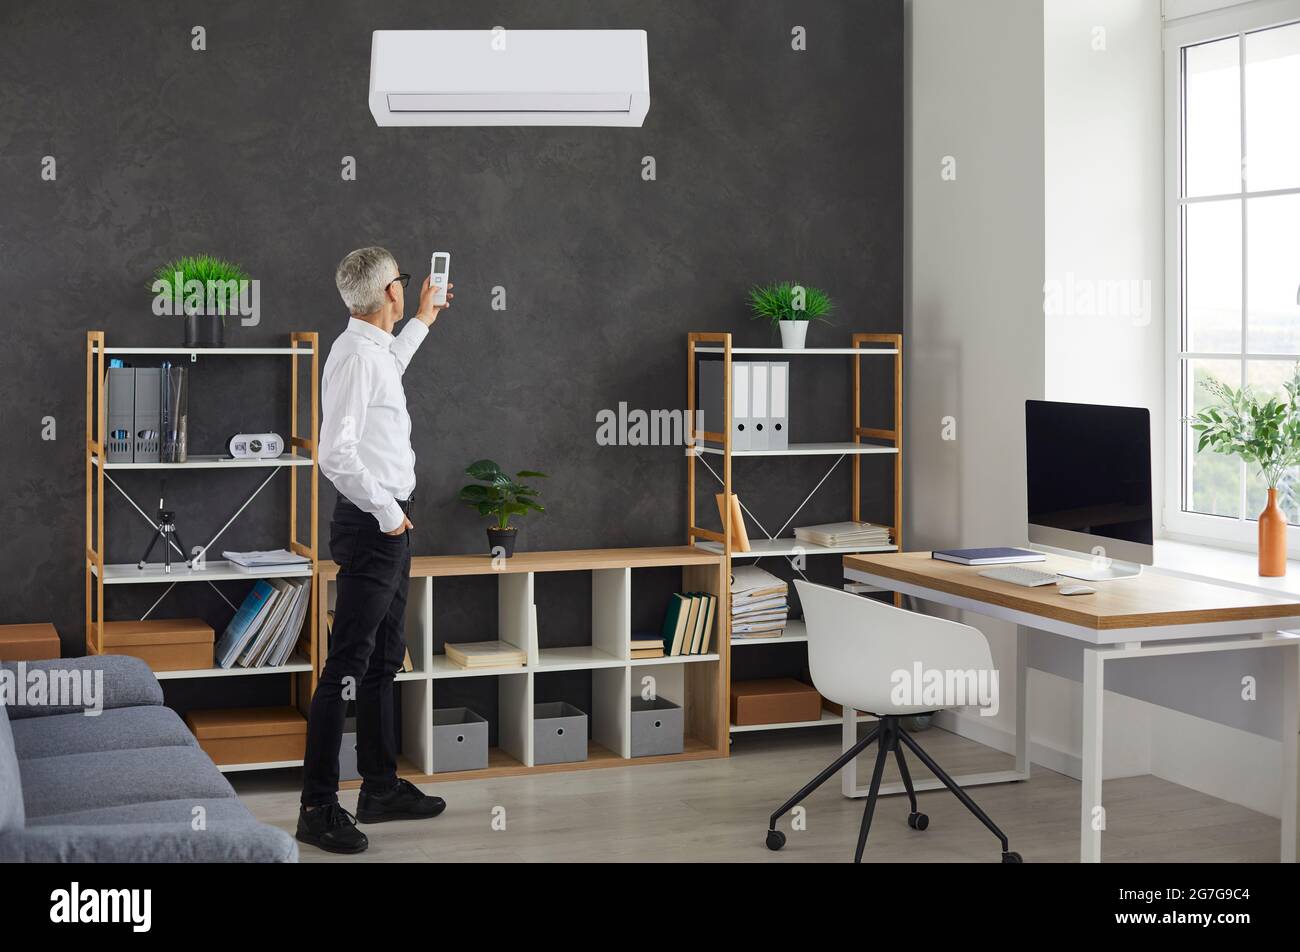 Businessman switching a modern wall mounted air conditioner in his office at work Stock Photo